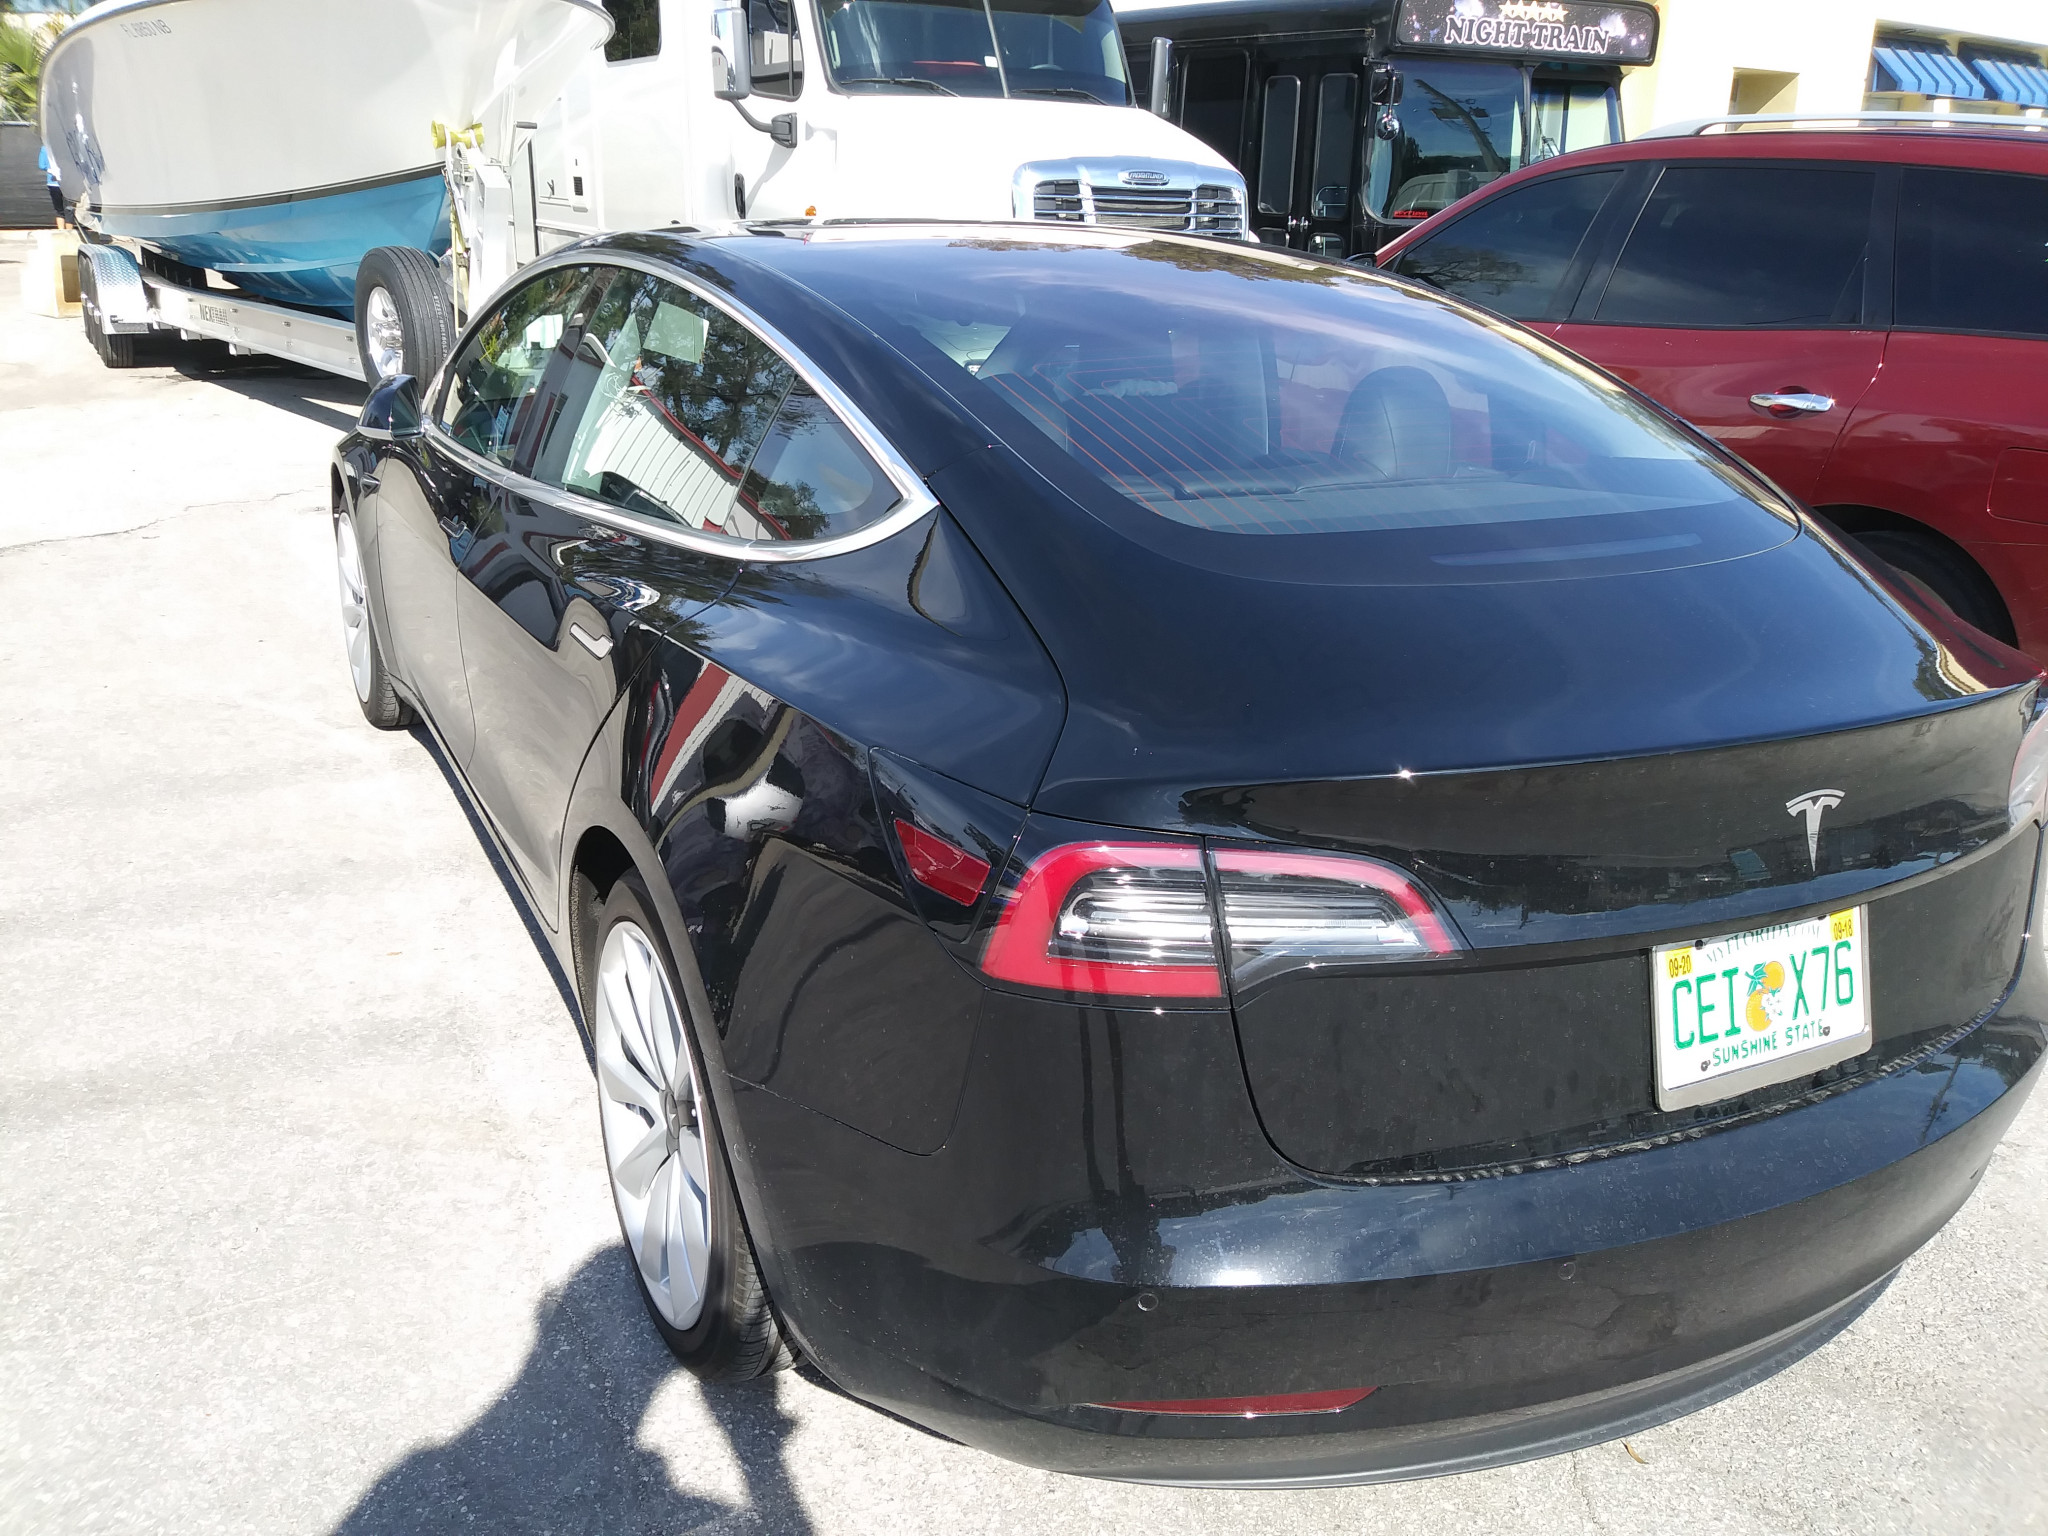 Model 3 Window Tint in Orlando by Ultimate Window Tinting